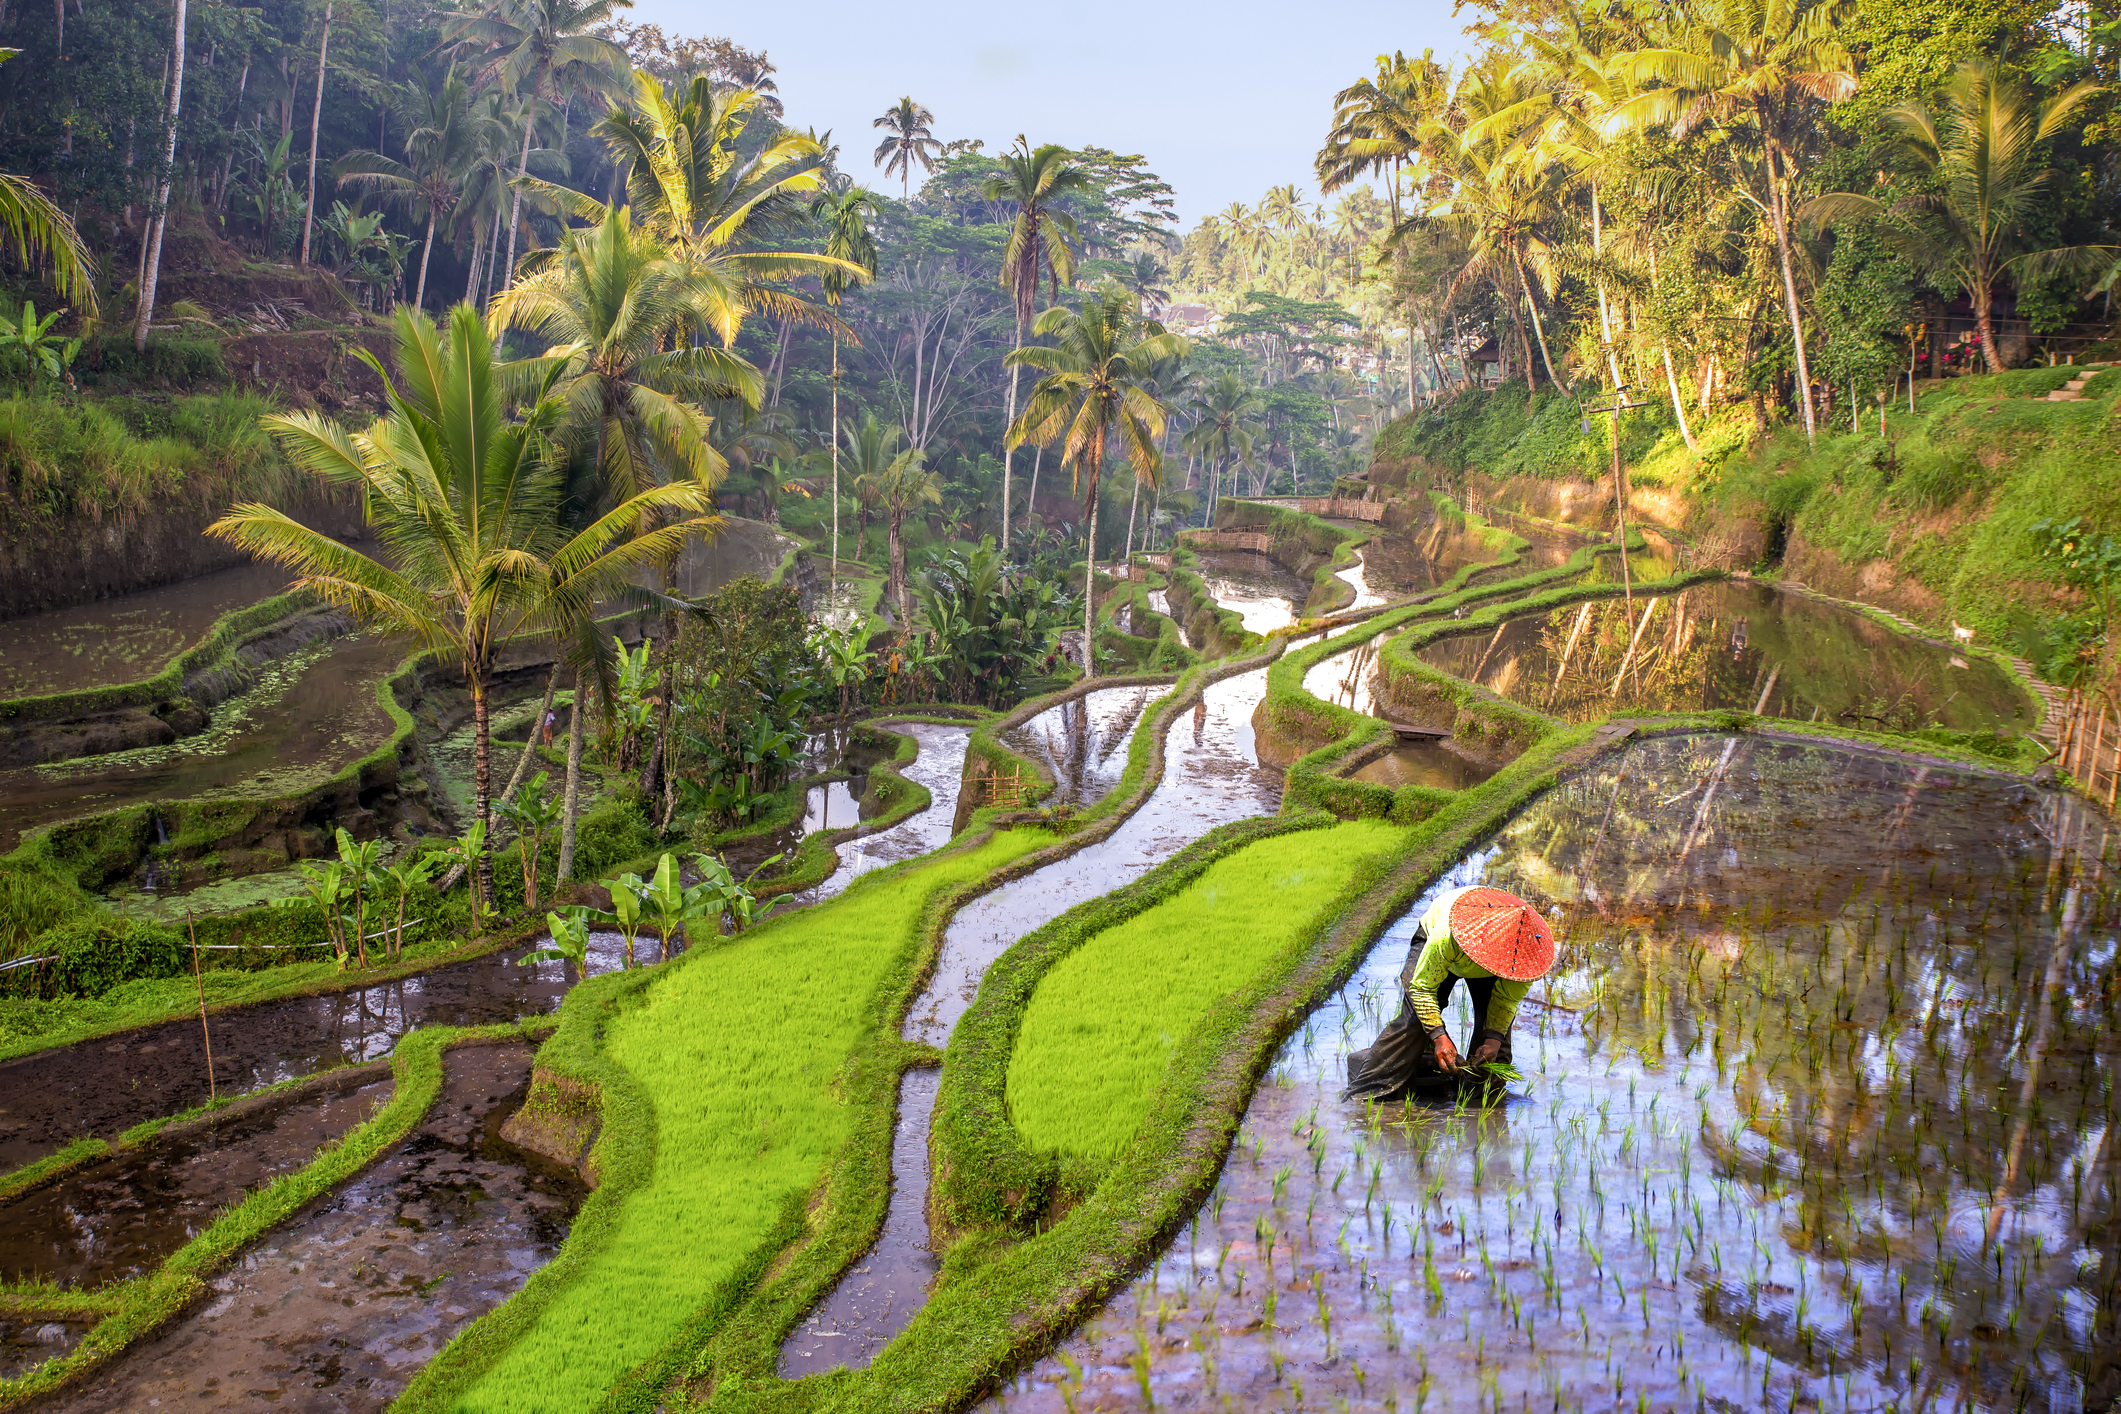 Rice field workers in Indonesia